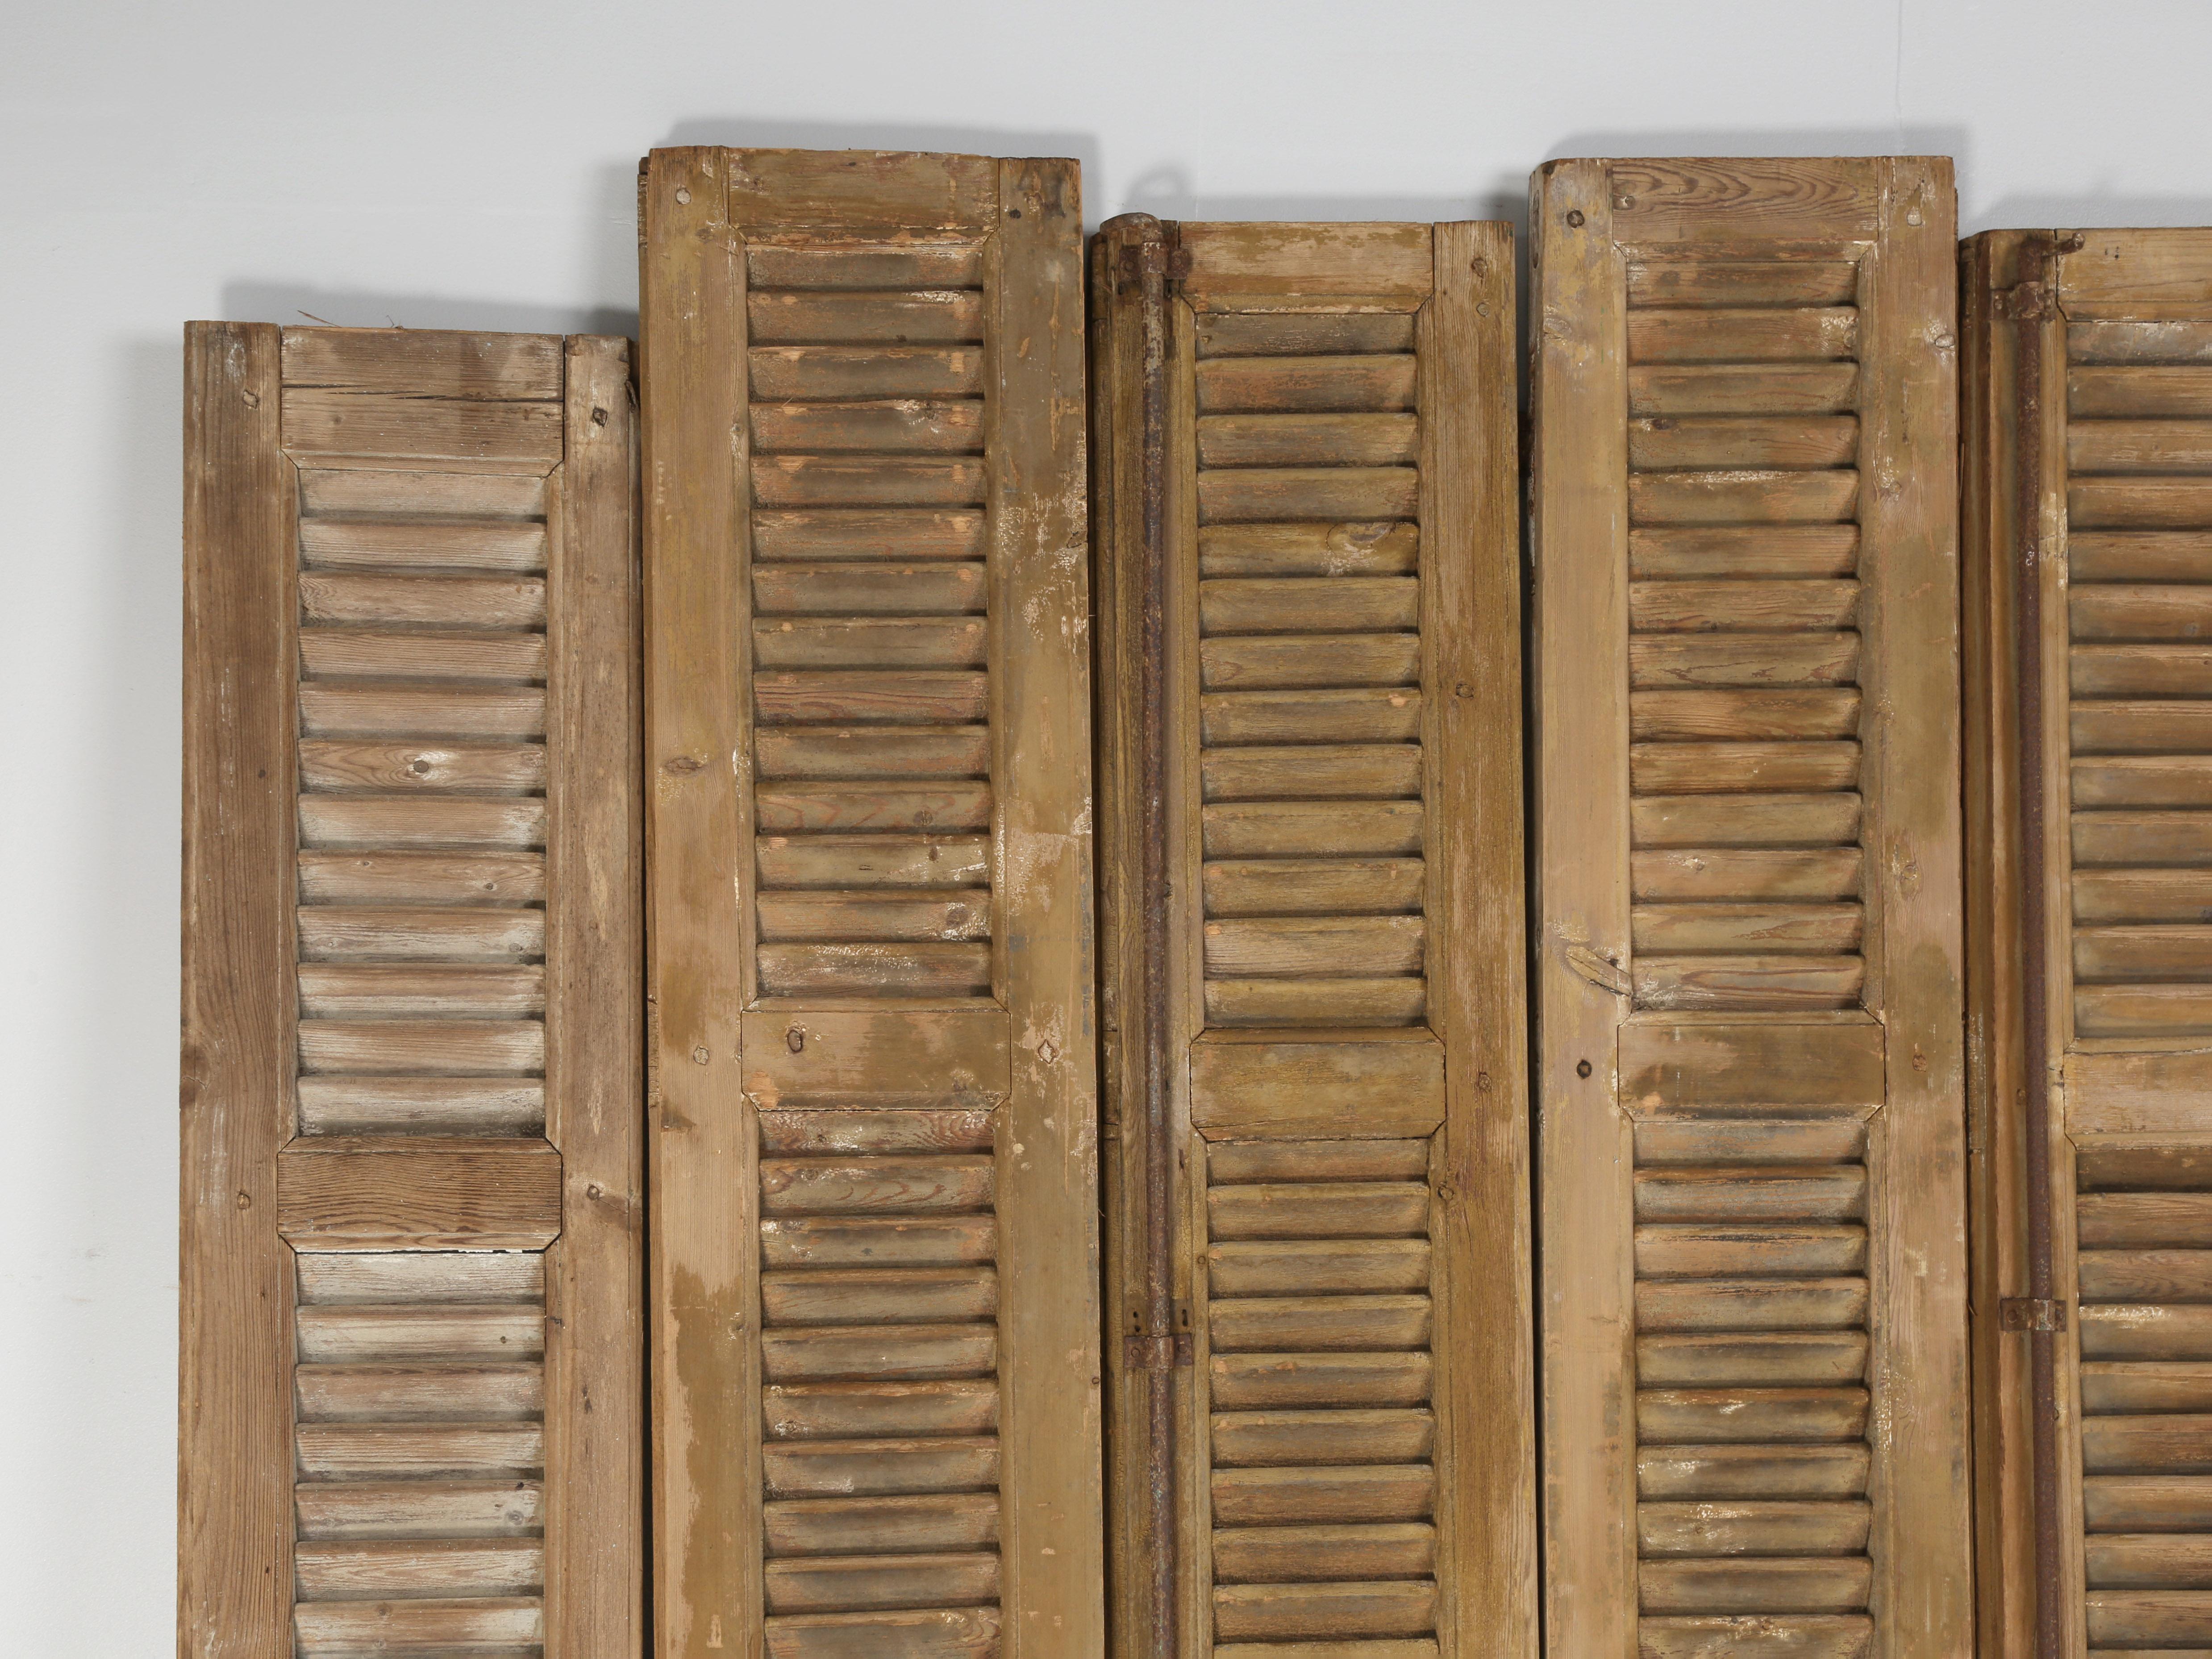 Antique French shutters that were removed from a chateau in Brittany decades ago and placed in storage. They are in fair to rough condition and are priced accordingly, however they would make a great screen or headboard. 
**Height provided is for